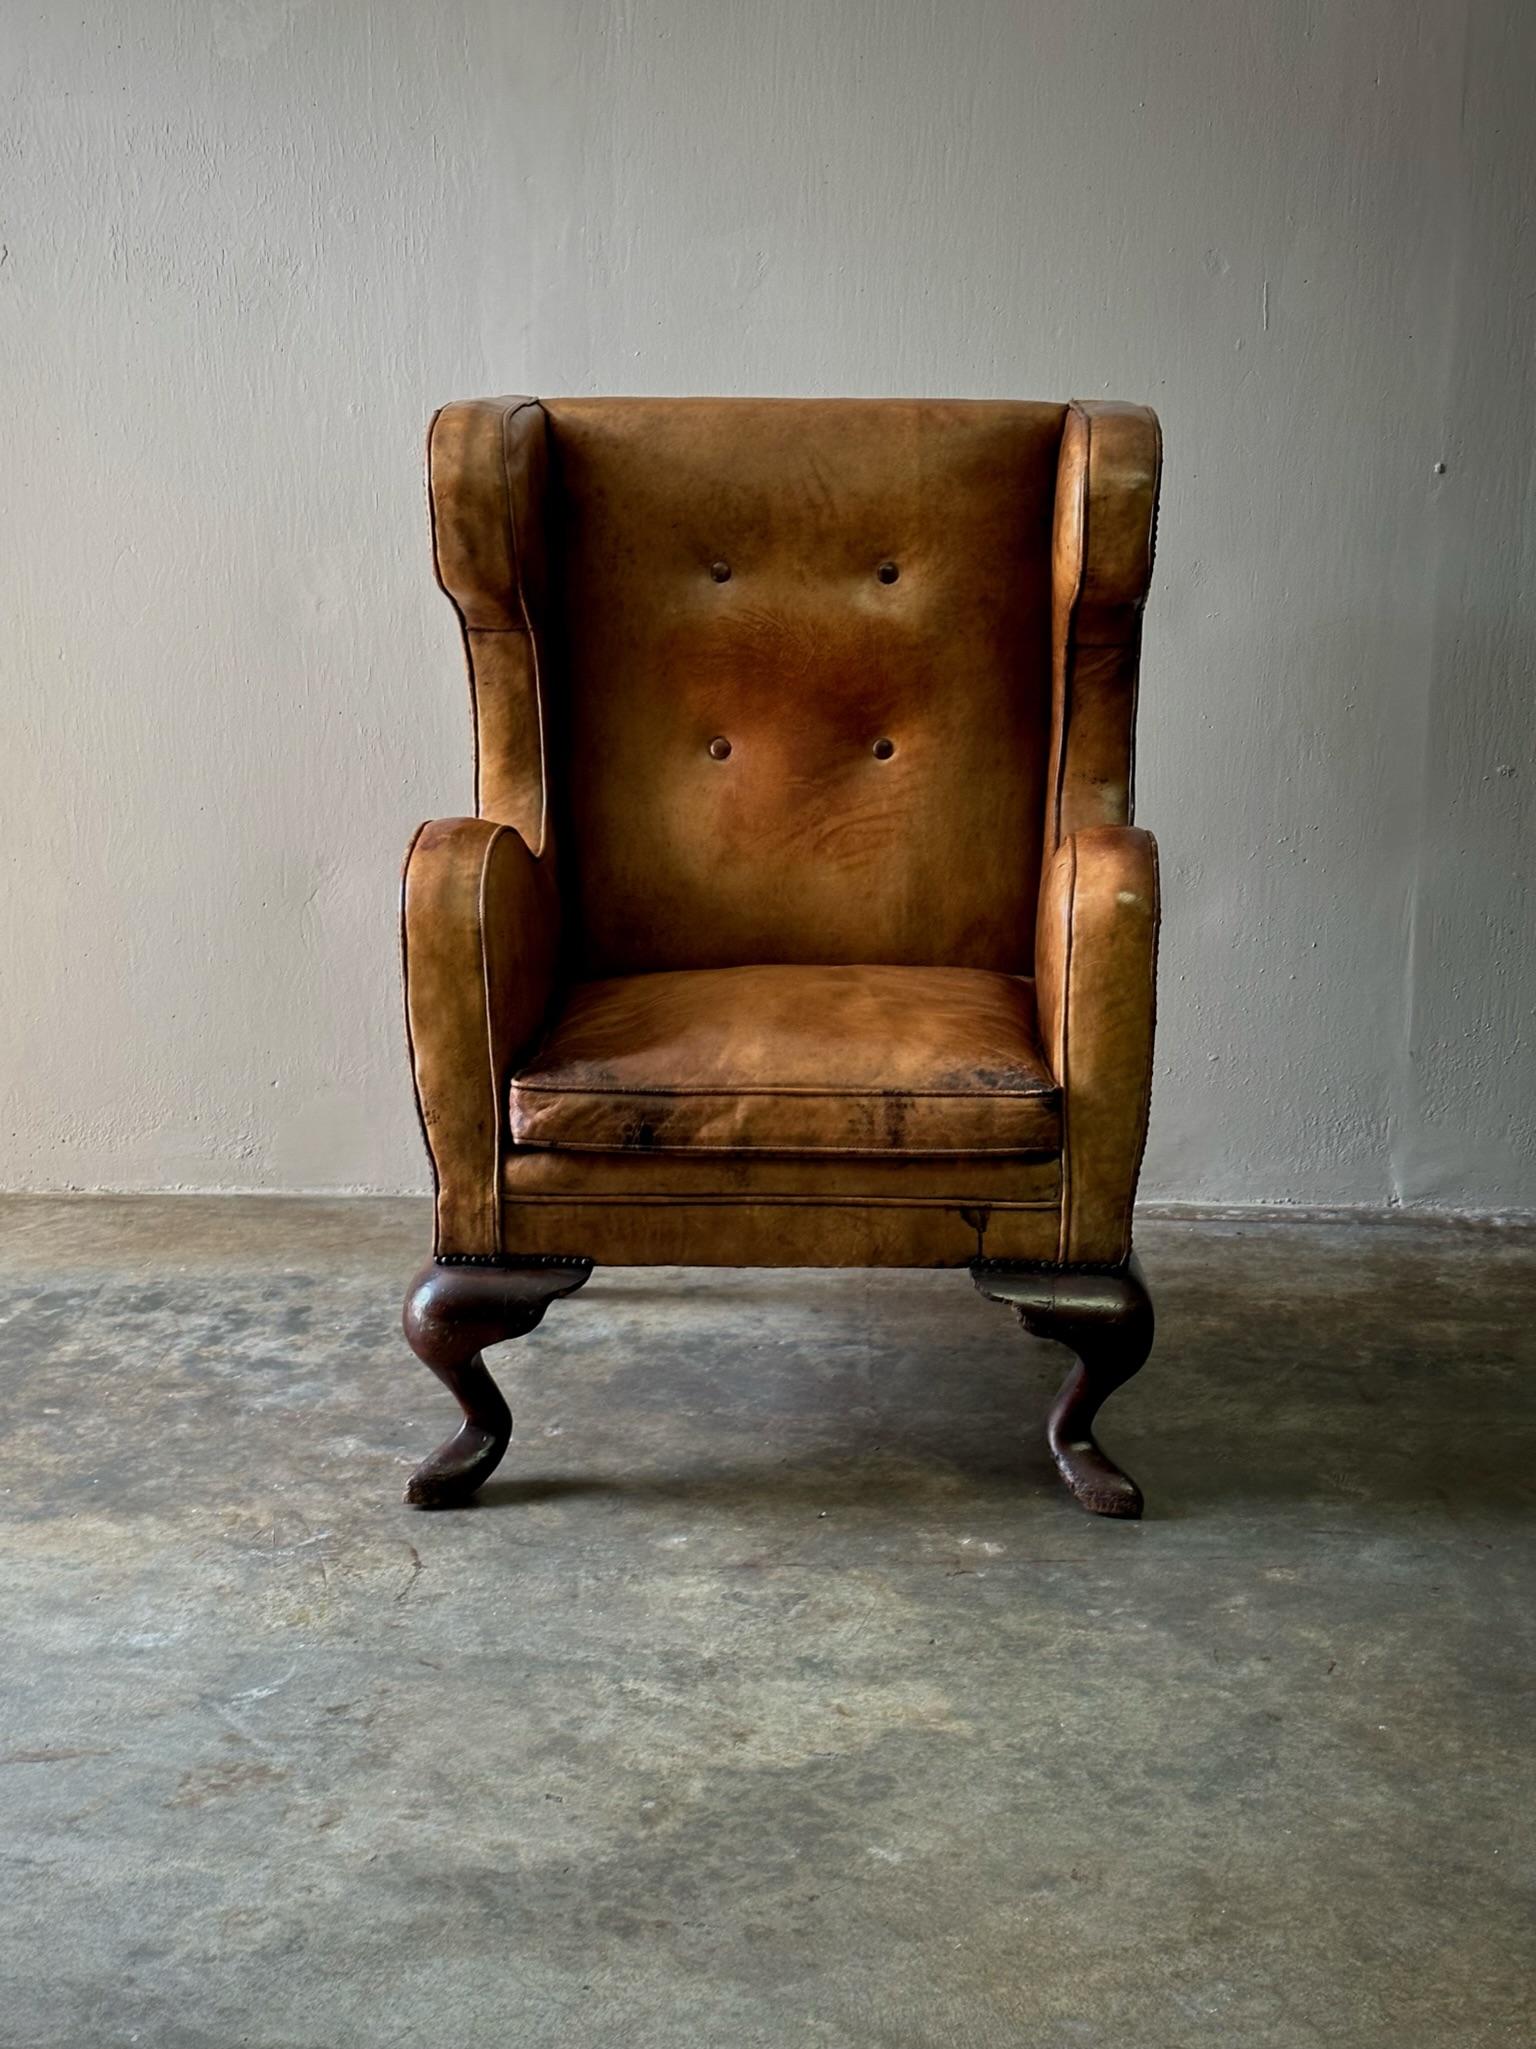 French late 19th century wingback armchair with original chestnut leather upholstery and carved wooden feet. Features a uniquely linear silhouette and exquisite patina. Bold yet understated. 

France, circa 1890

Dimensions: 30.7W x 29.5D x 44H (SH